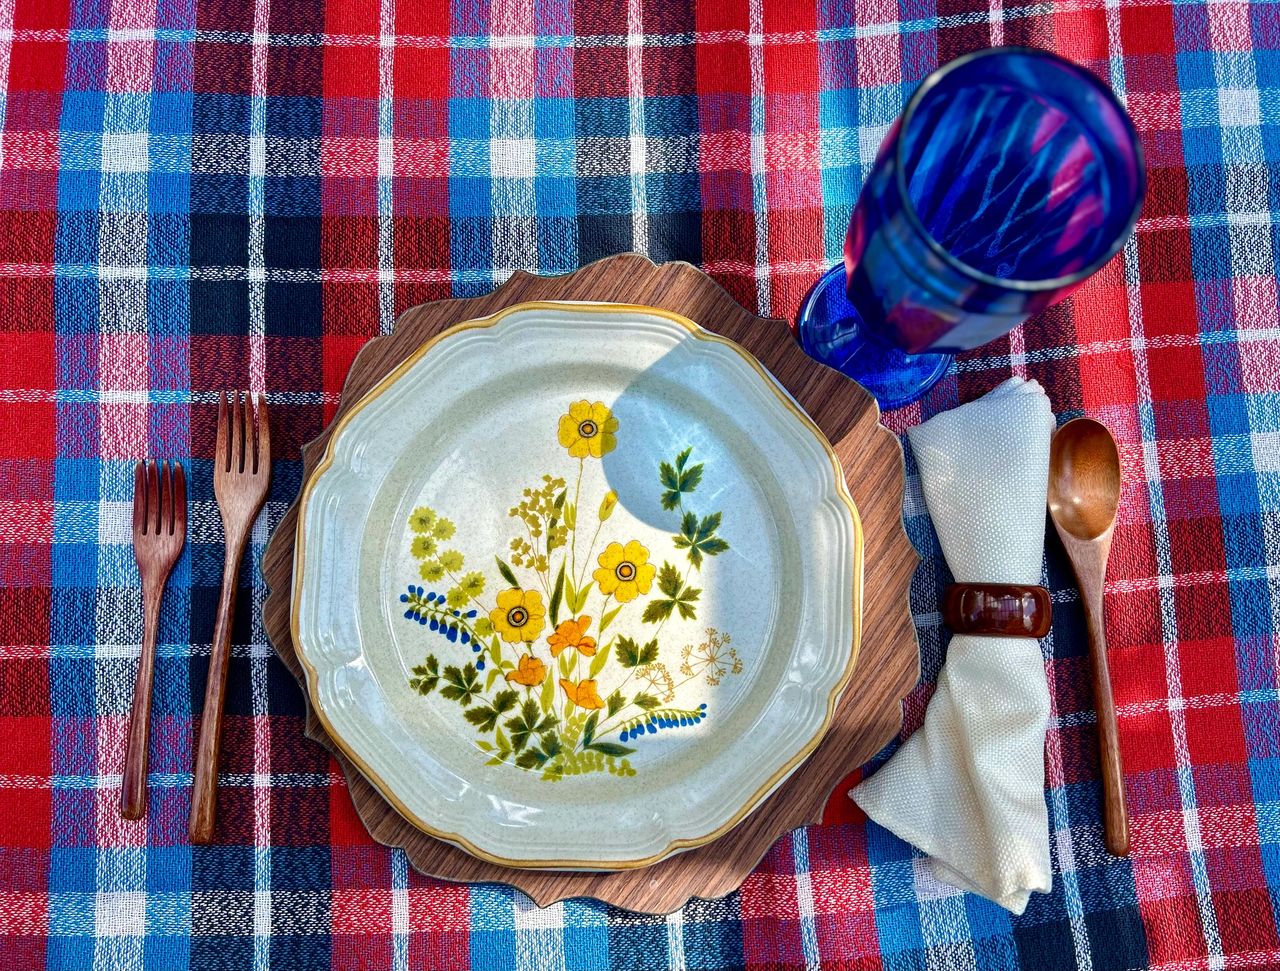 Vintage dishes on a plaid tablecloth